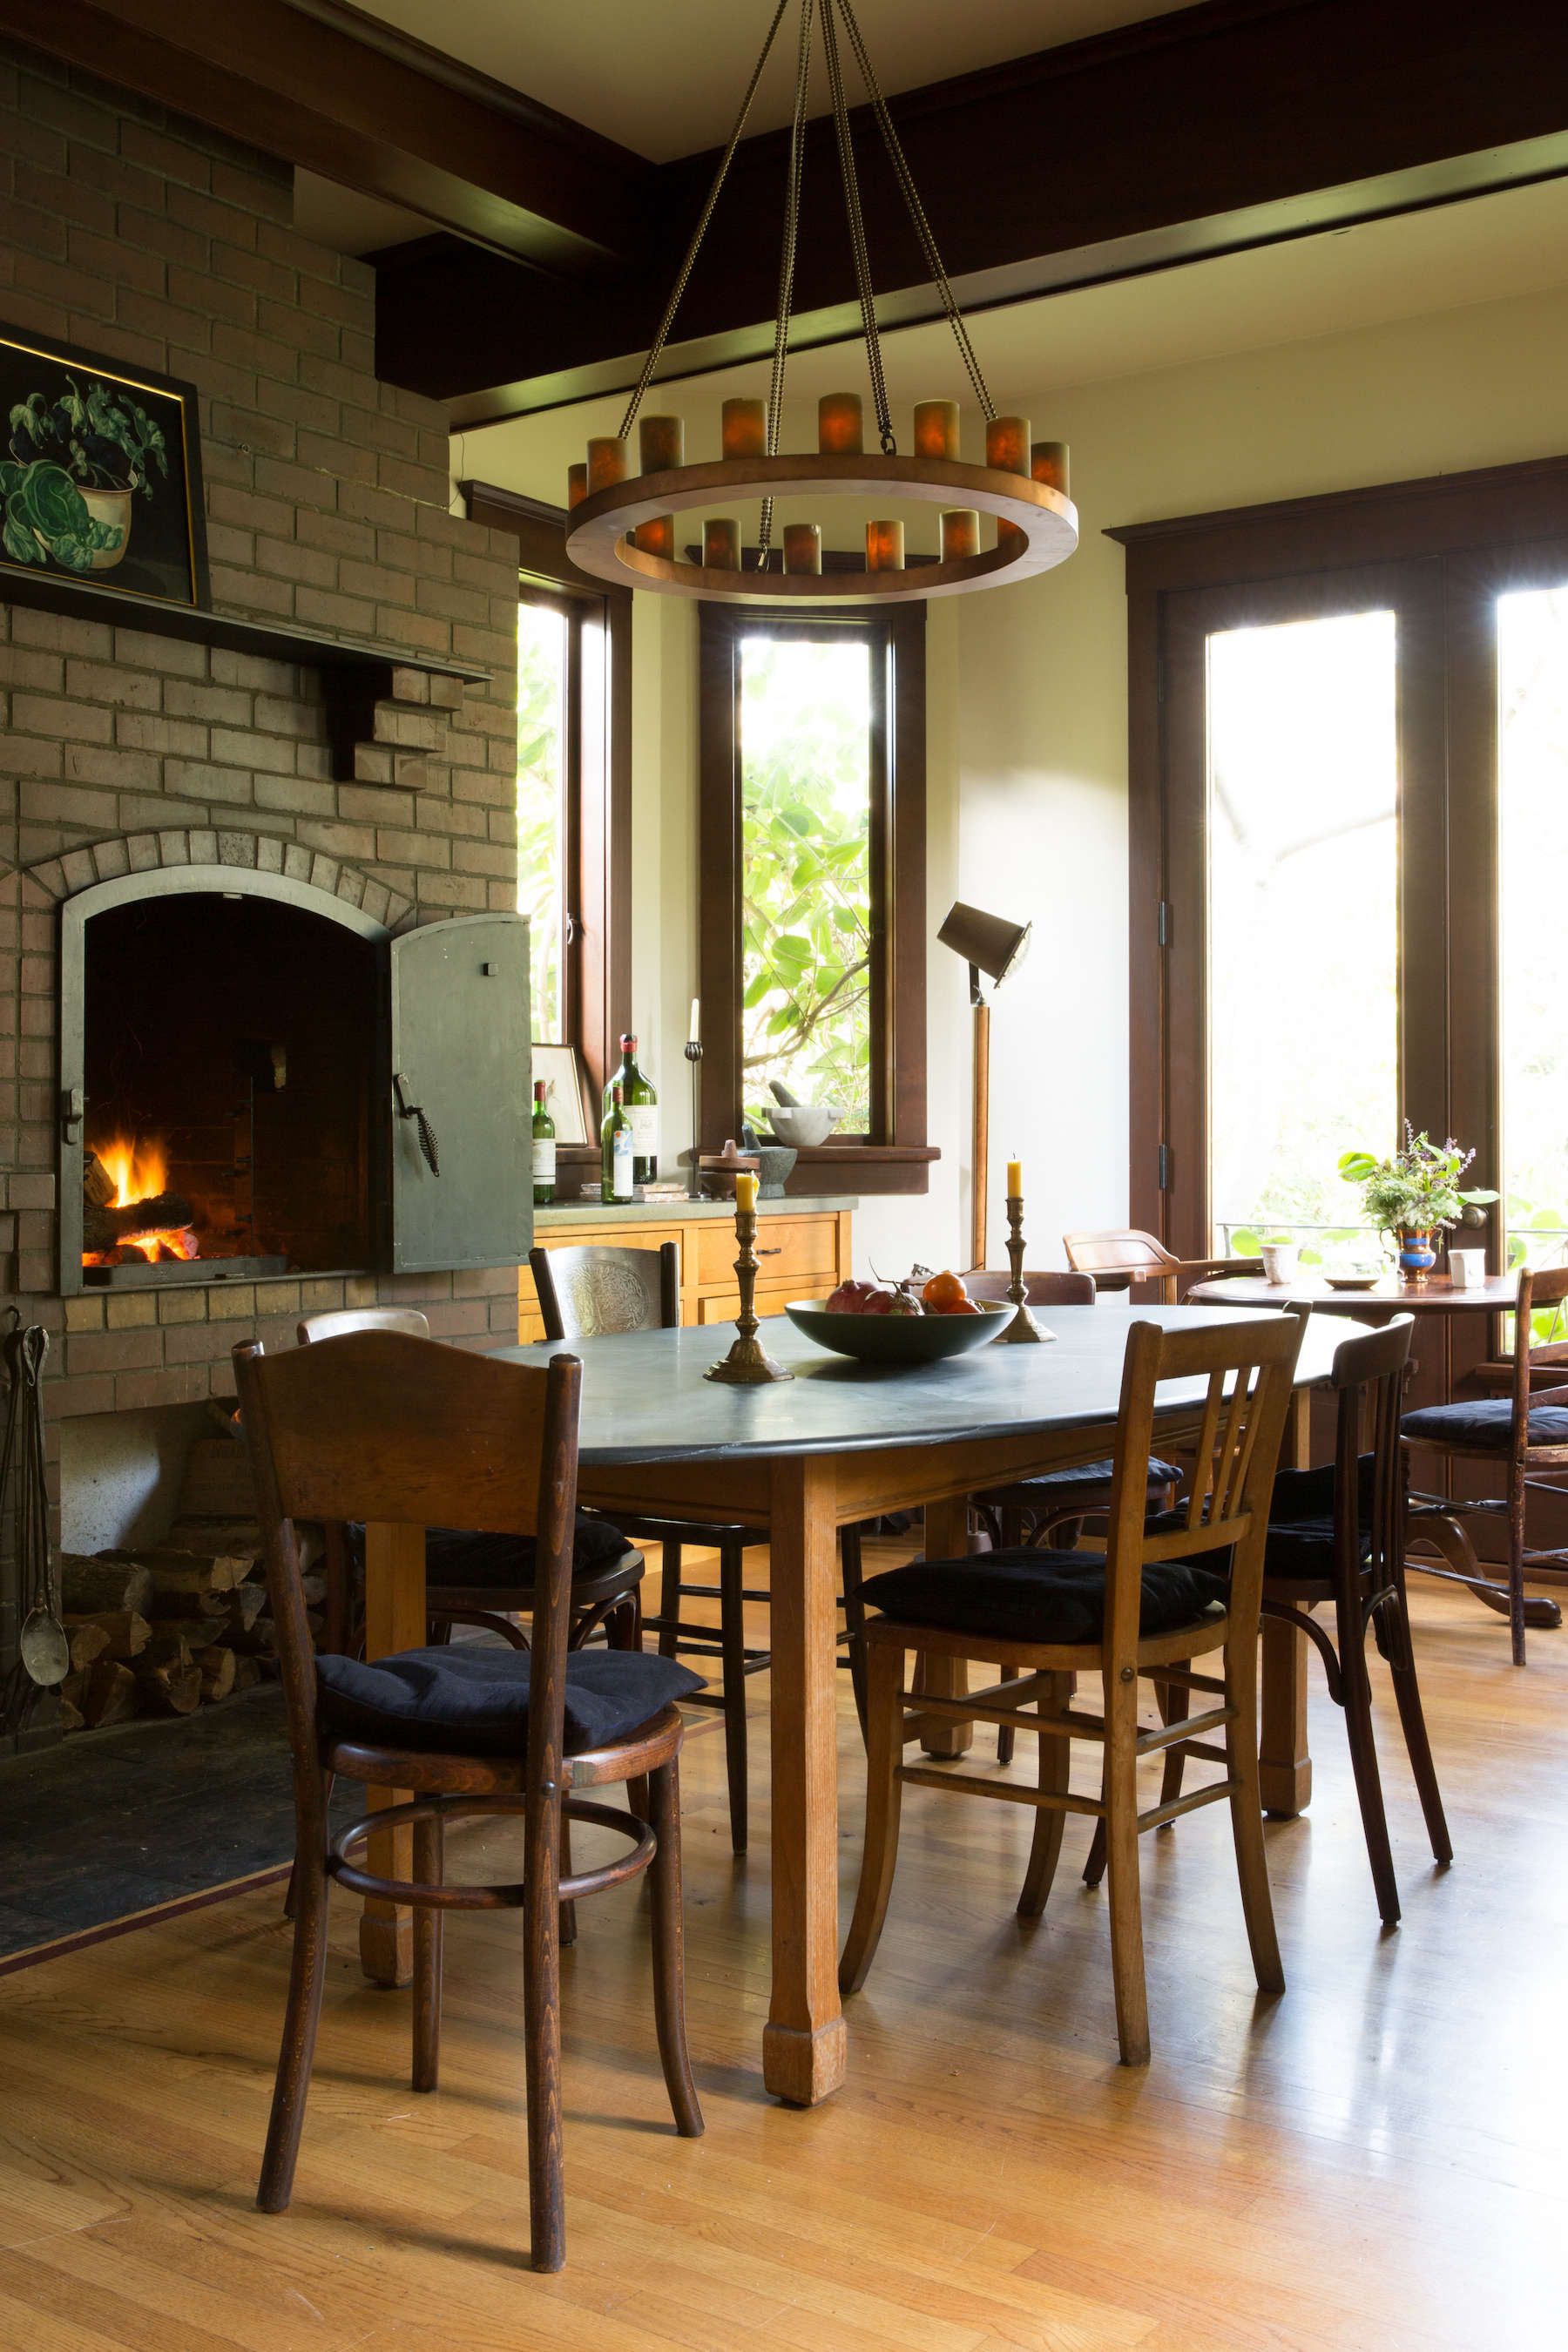 the dining room (and fireplace with pizza oven) is an extension of the kitchen. 23